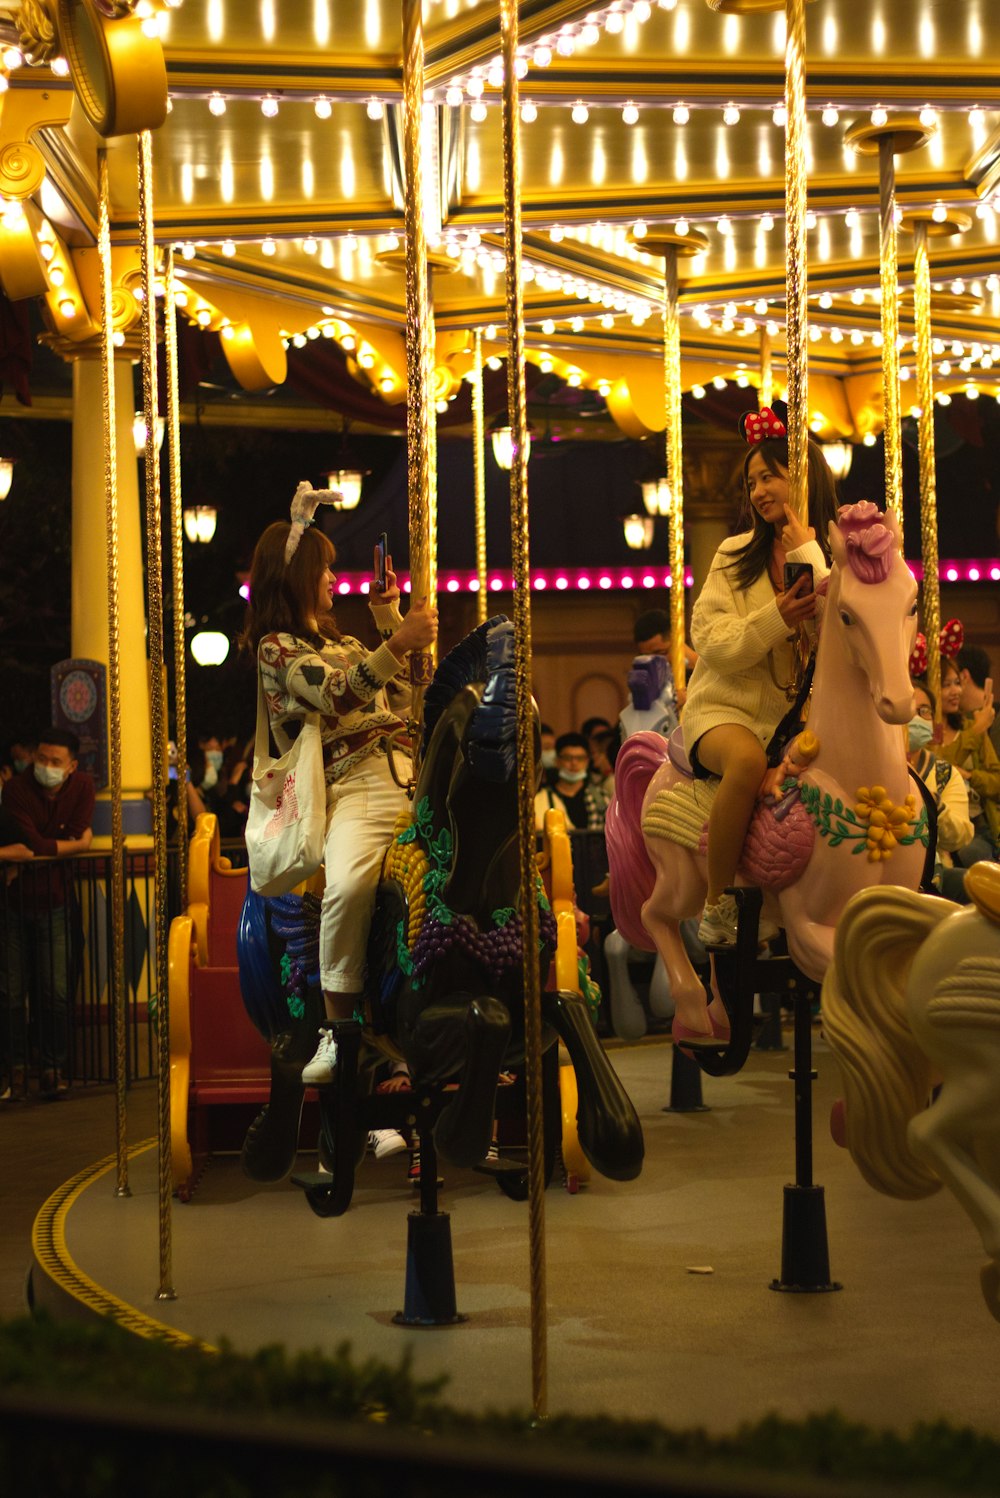 a group of people riding on a merry go round